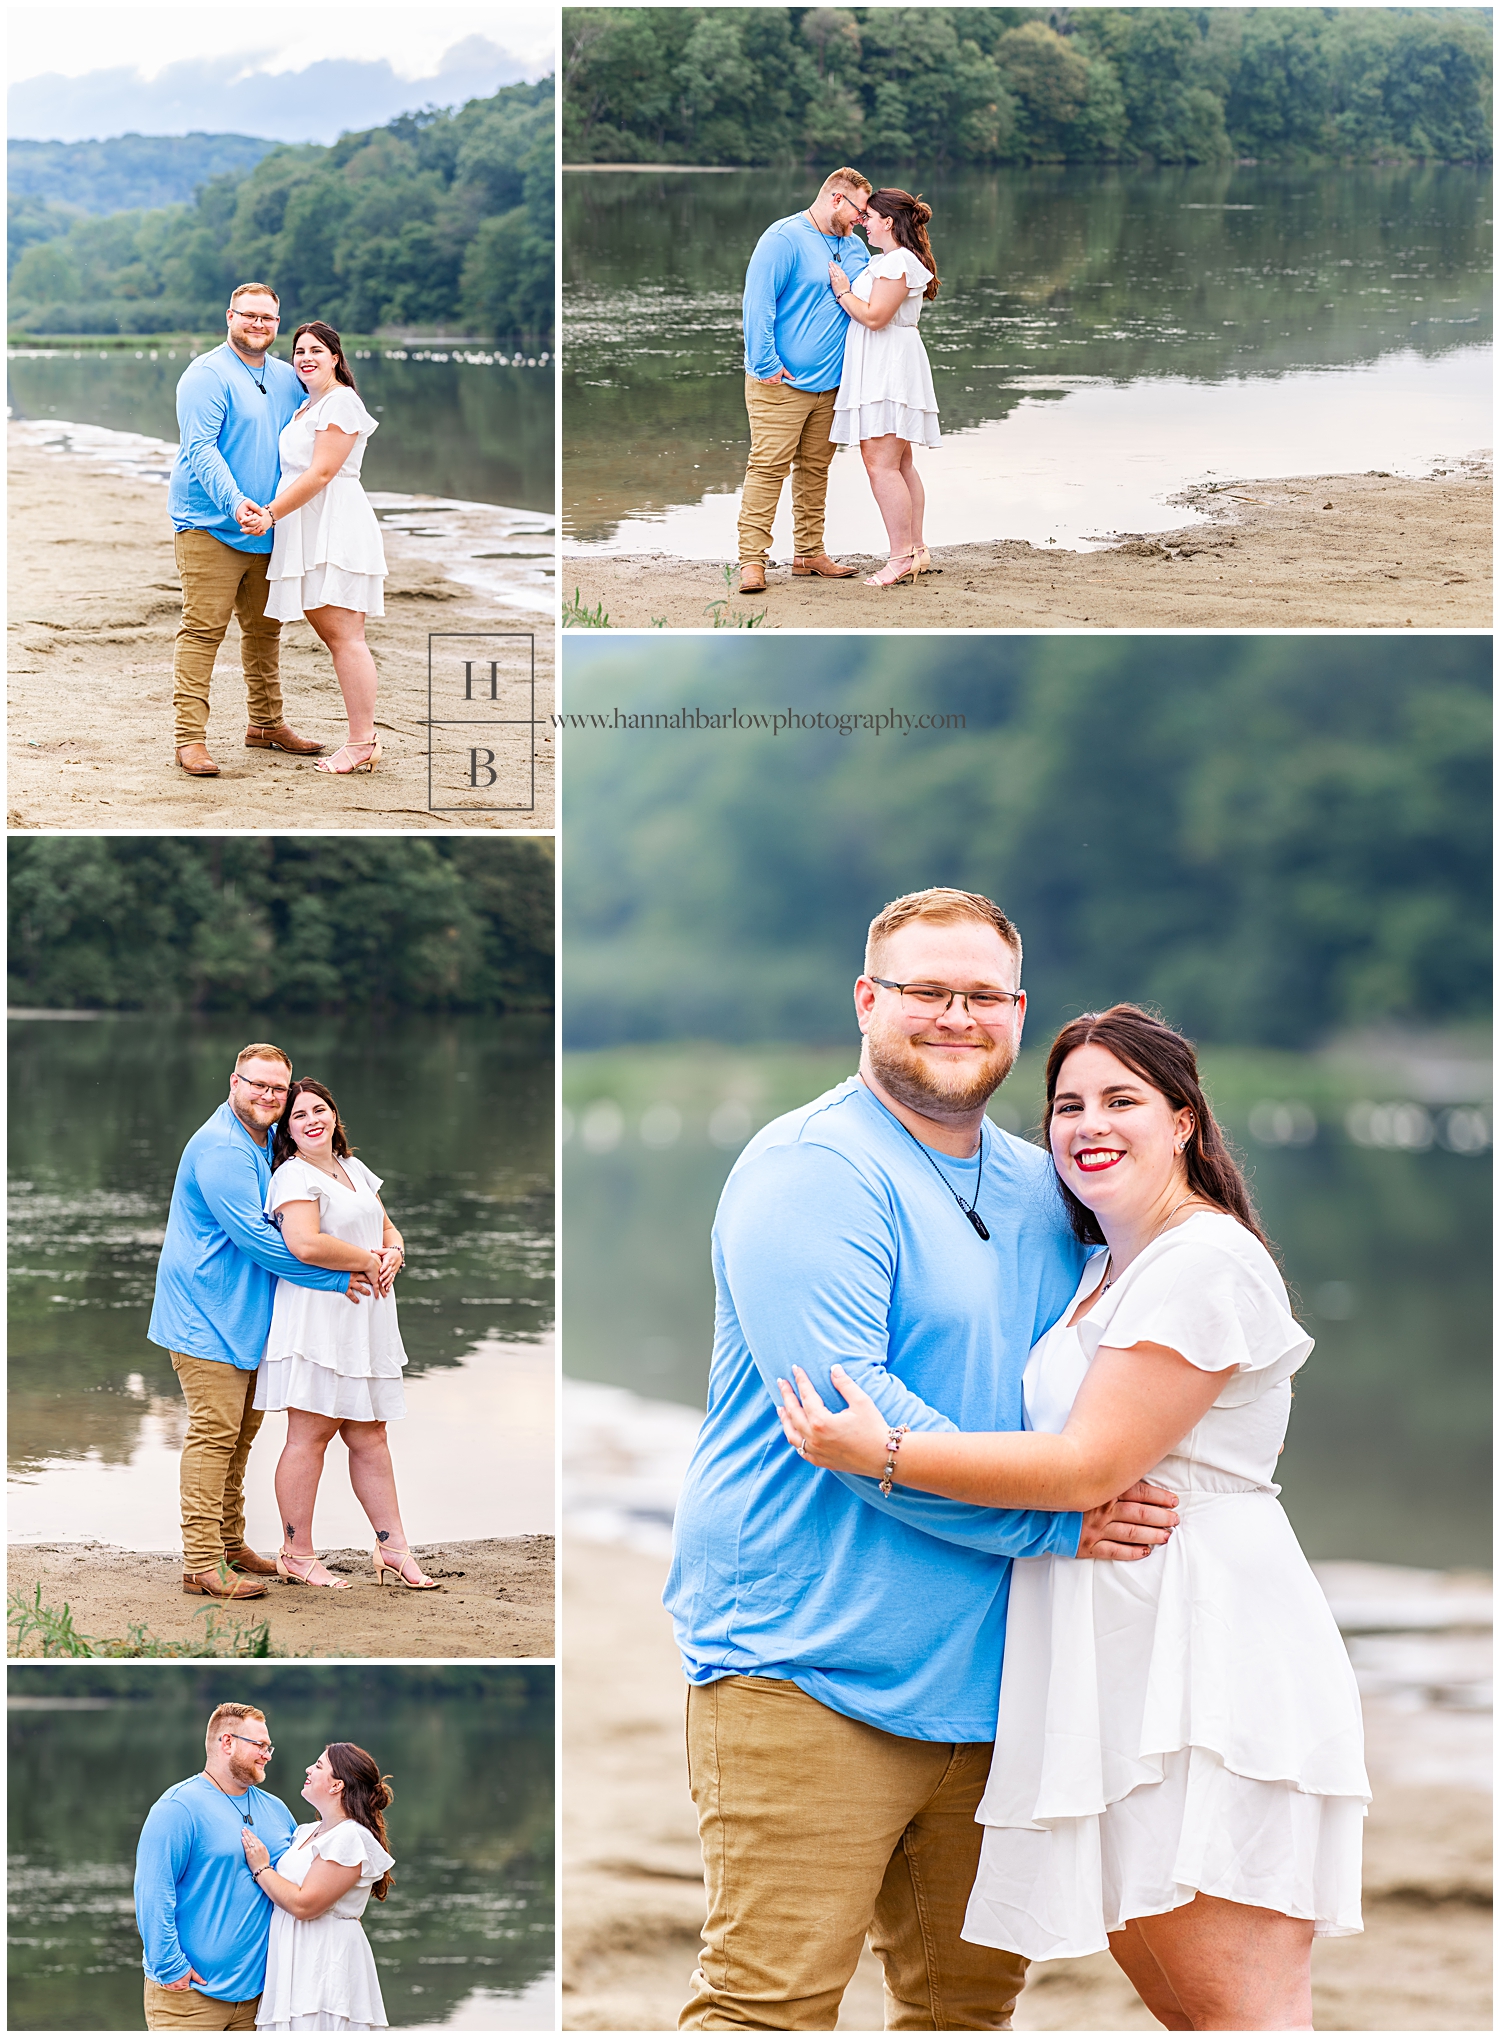 Man and woman pose for engagement photos on a beach by a lake.